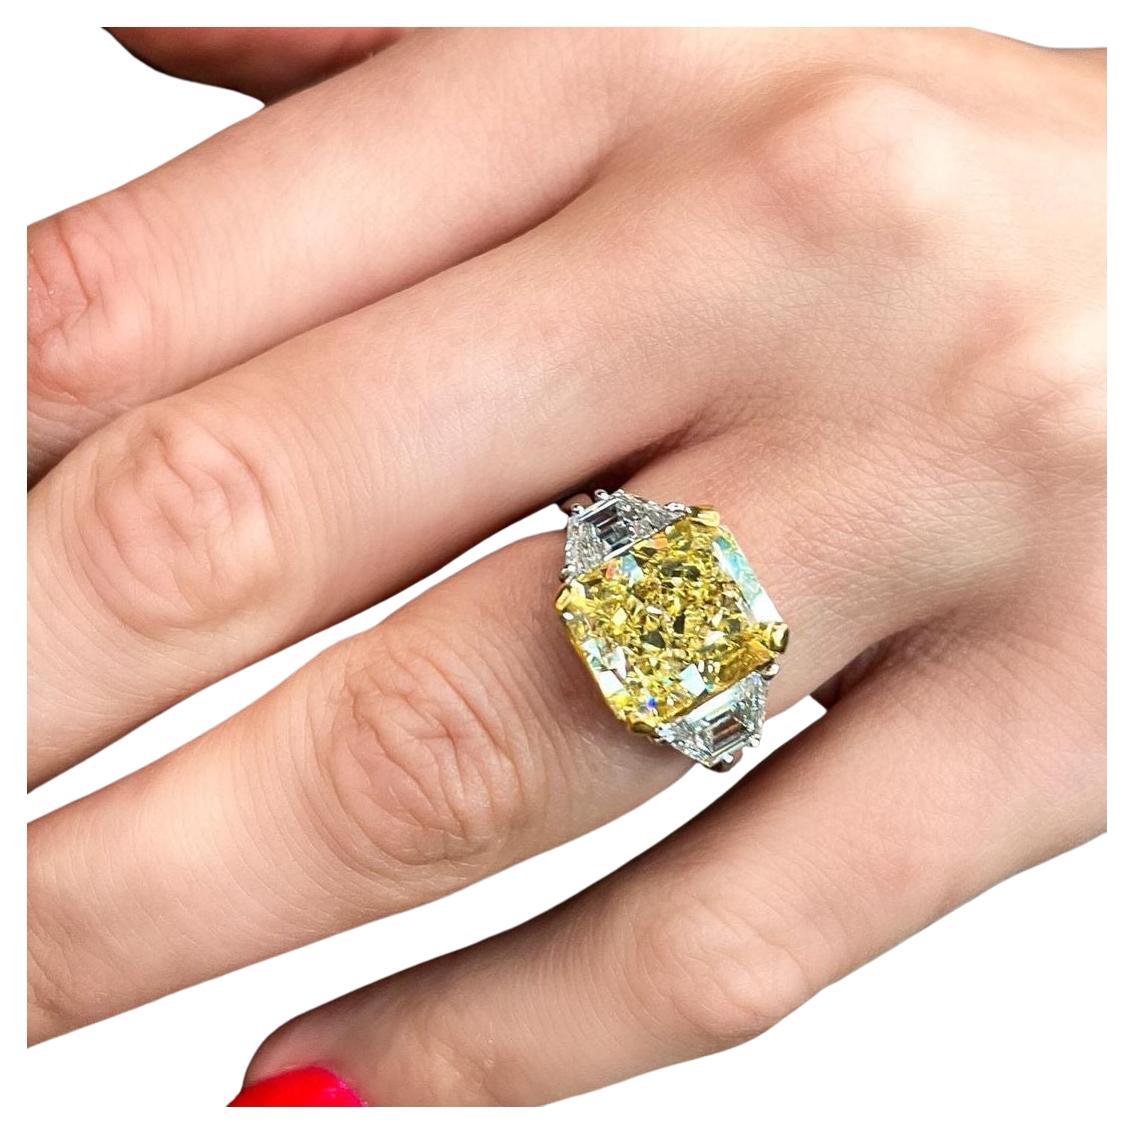 A STUNNING yellow diamond ring!

GIA certified 6 carat Radiant cut Fancy Yellow, center diamond.

.85 carats of white side diamonds.

Custom platinum and 18k yellow gold mounting.

Size 7, this ring can easily be resized.

